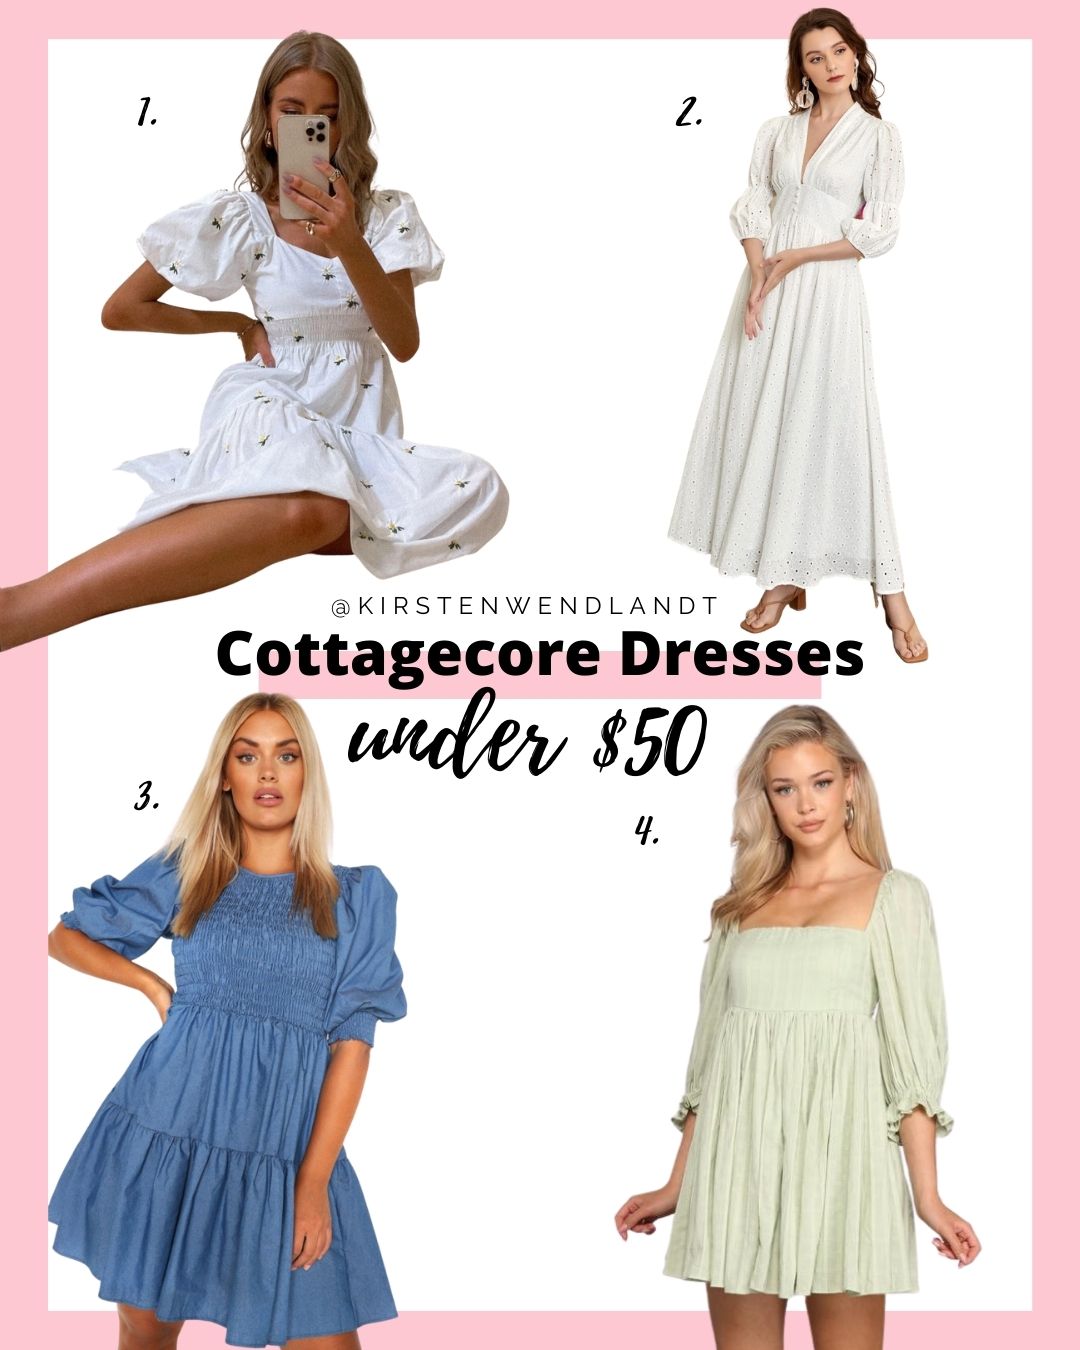 If you're smitten over the cottagecore aesthetic like me you'll definitely love this list list of cheap cottagecore dresses you can buy on a budget! Each of these adorable cottagecore dresses are $50 or under